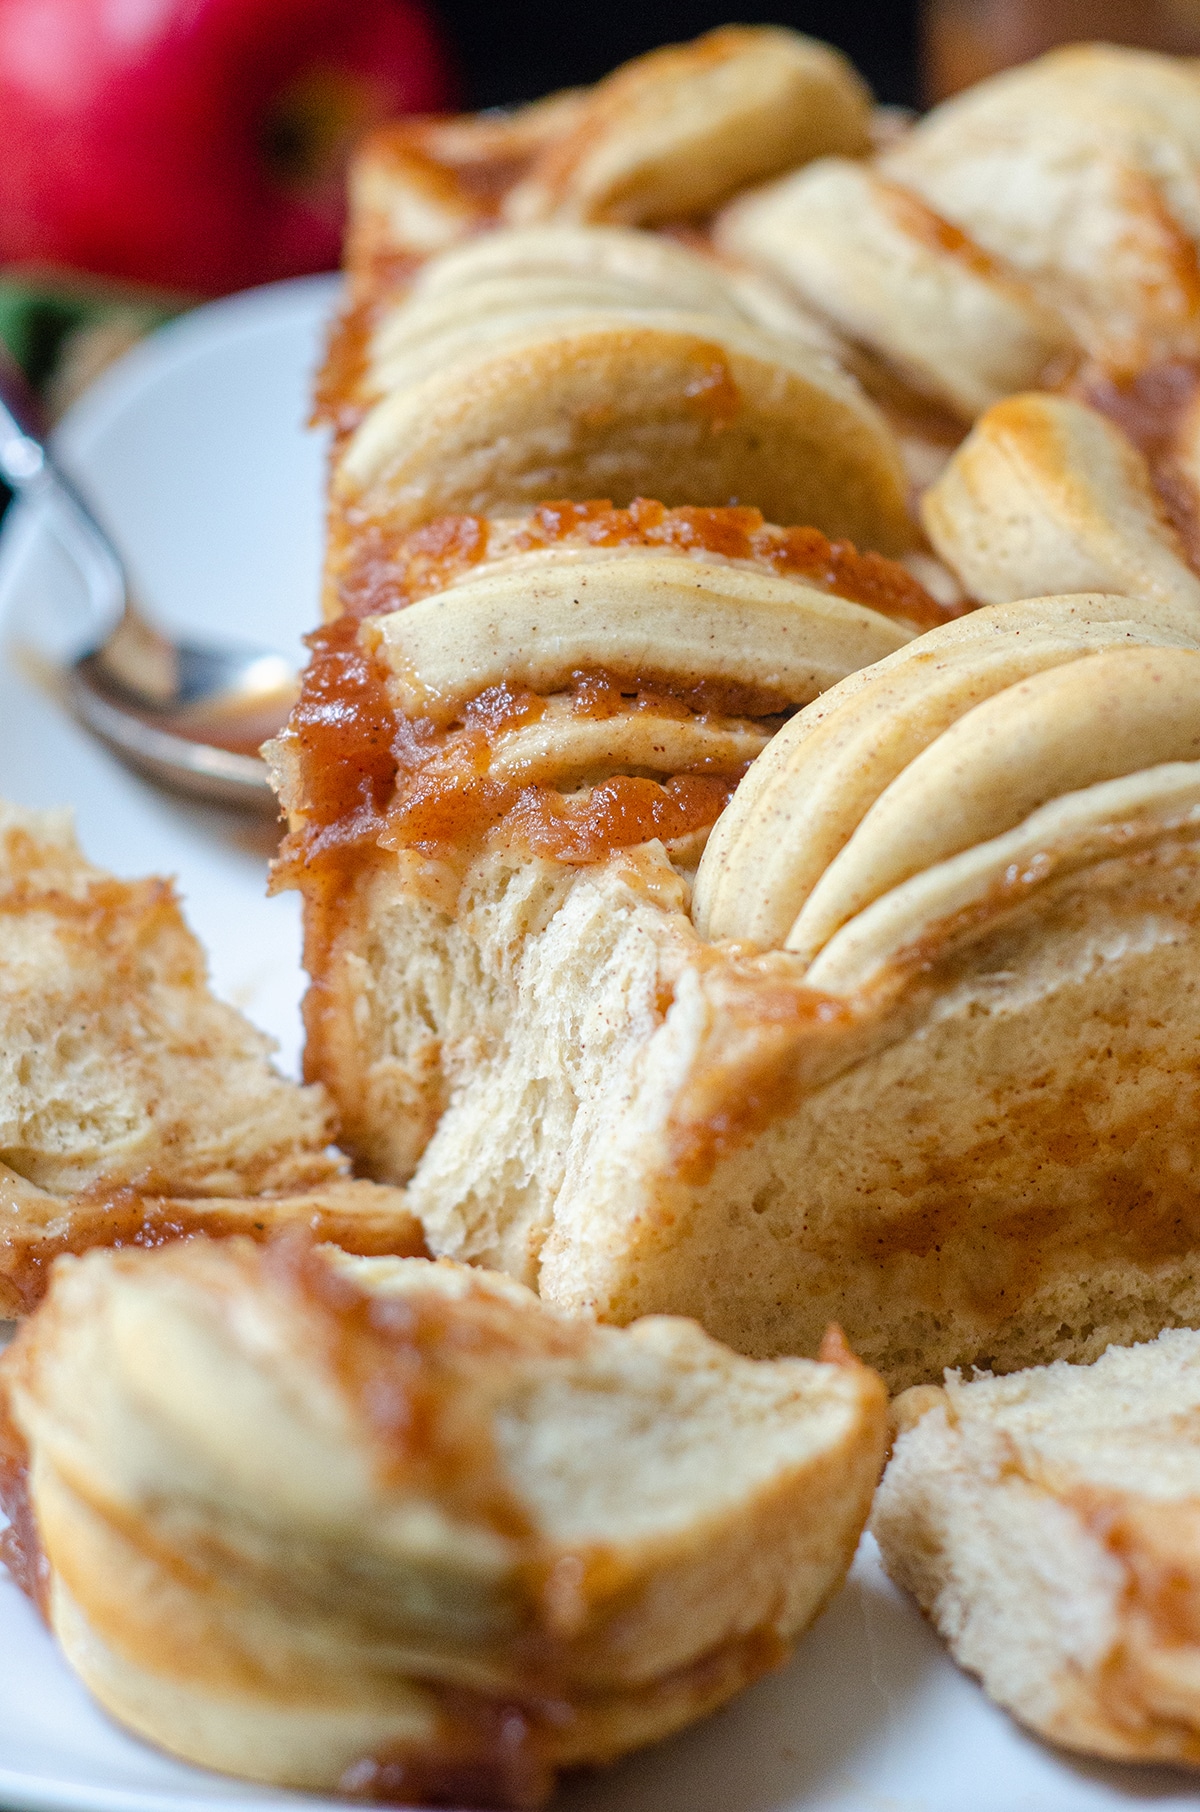 Soft and fluffy pull-apart bread spiced with cinnamon and spread with homemade apple butter. via @frshaprilflours